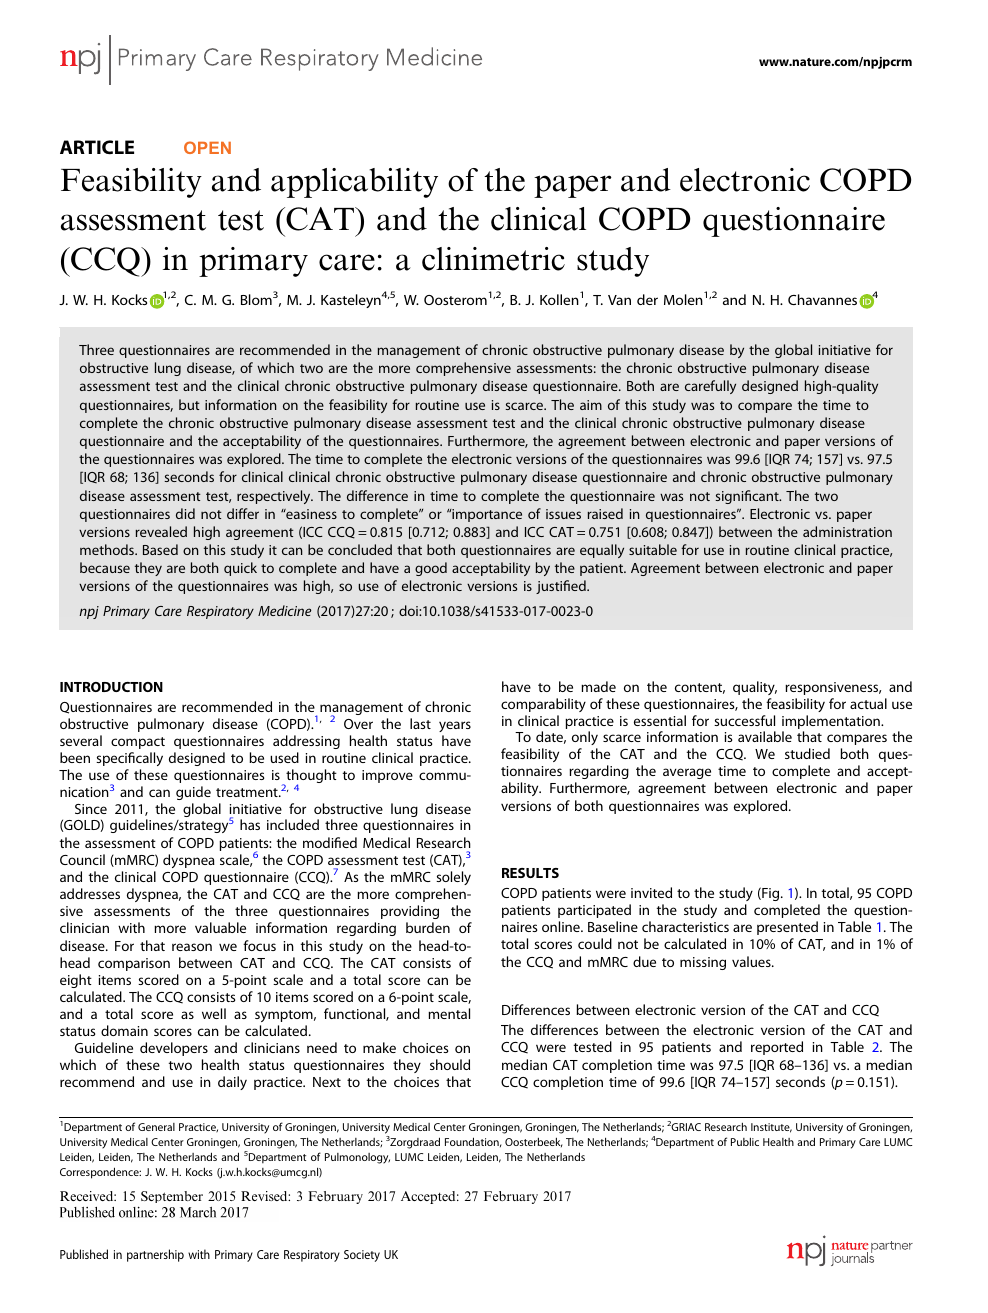 36 HQ Photos Cat Test Online Copd : The Copd Assessment Test Cat Response To Pulmonary Rehabilitation A Multicentre Prospective Study Thorax